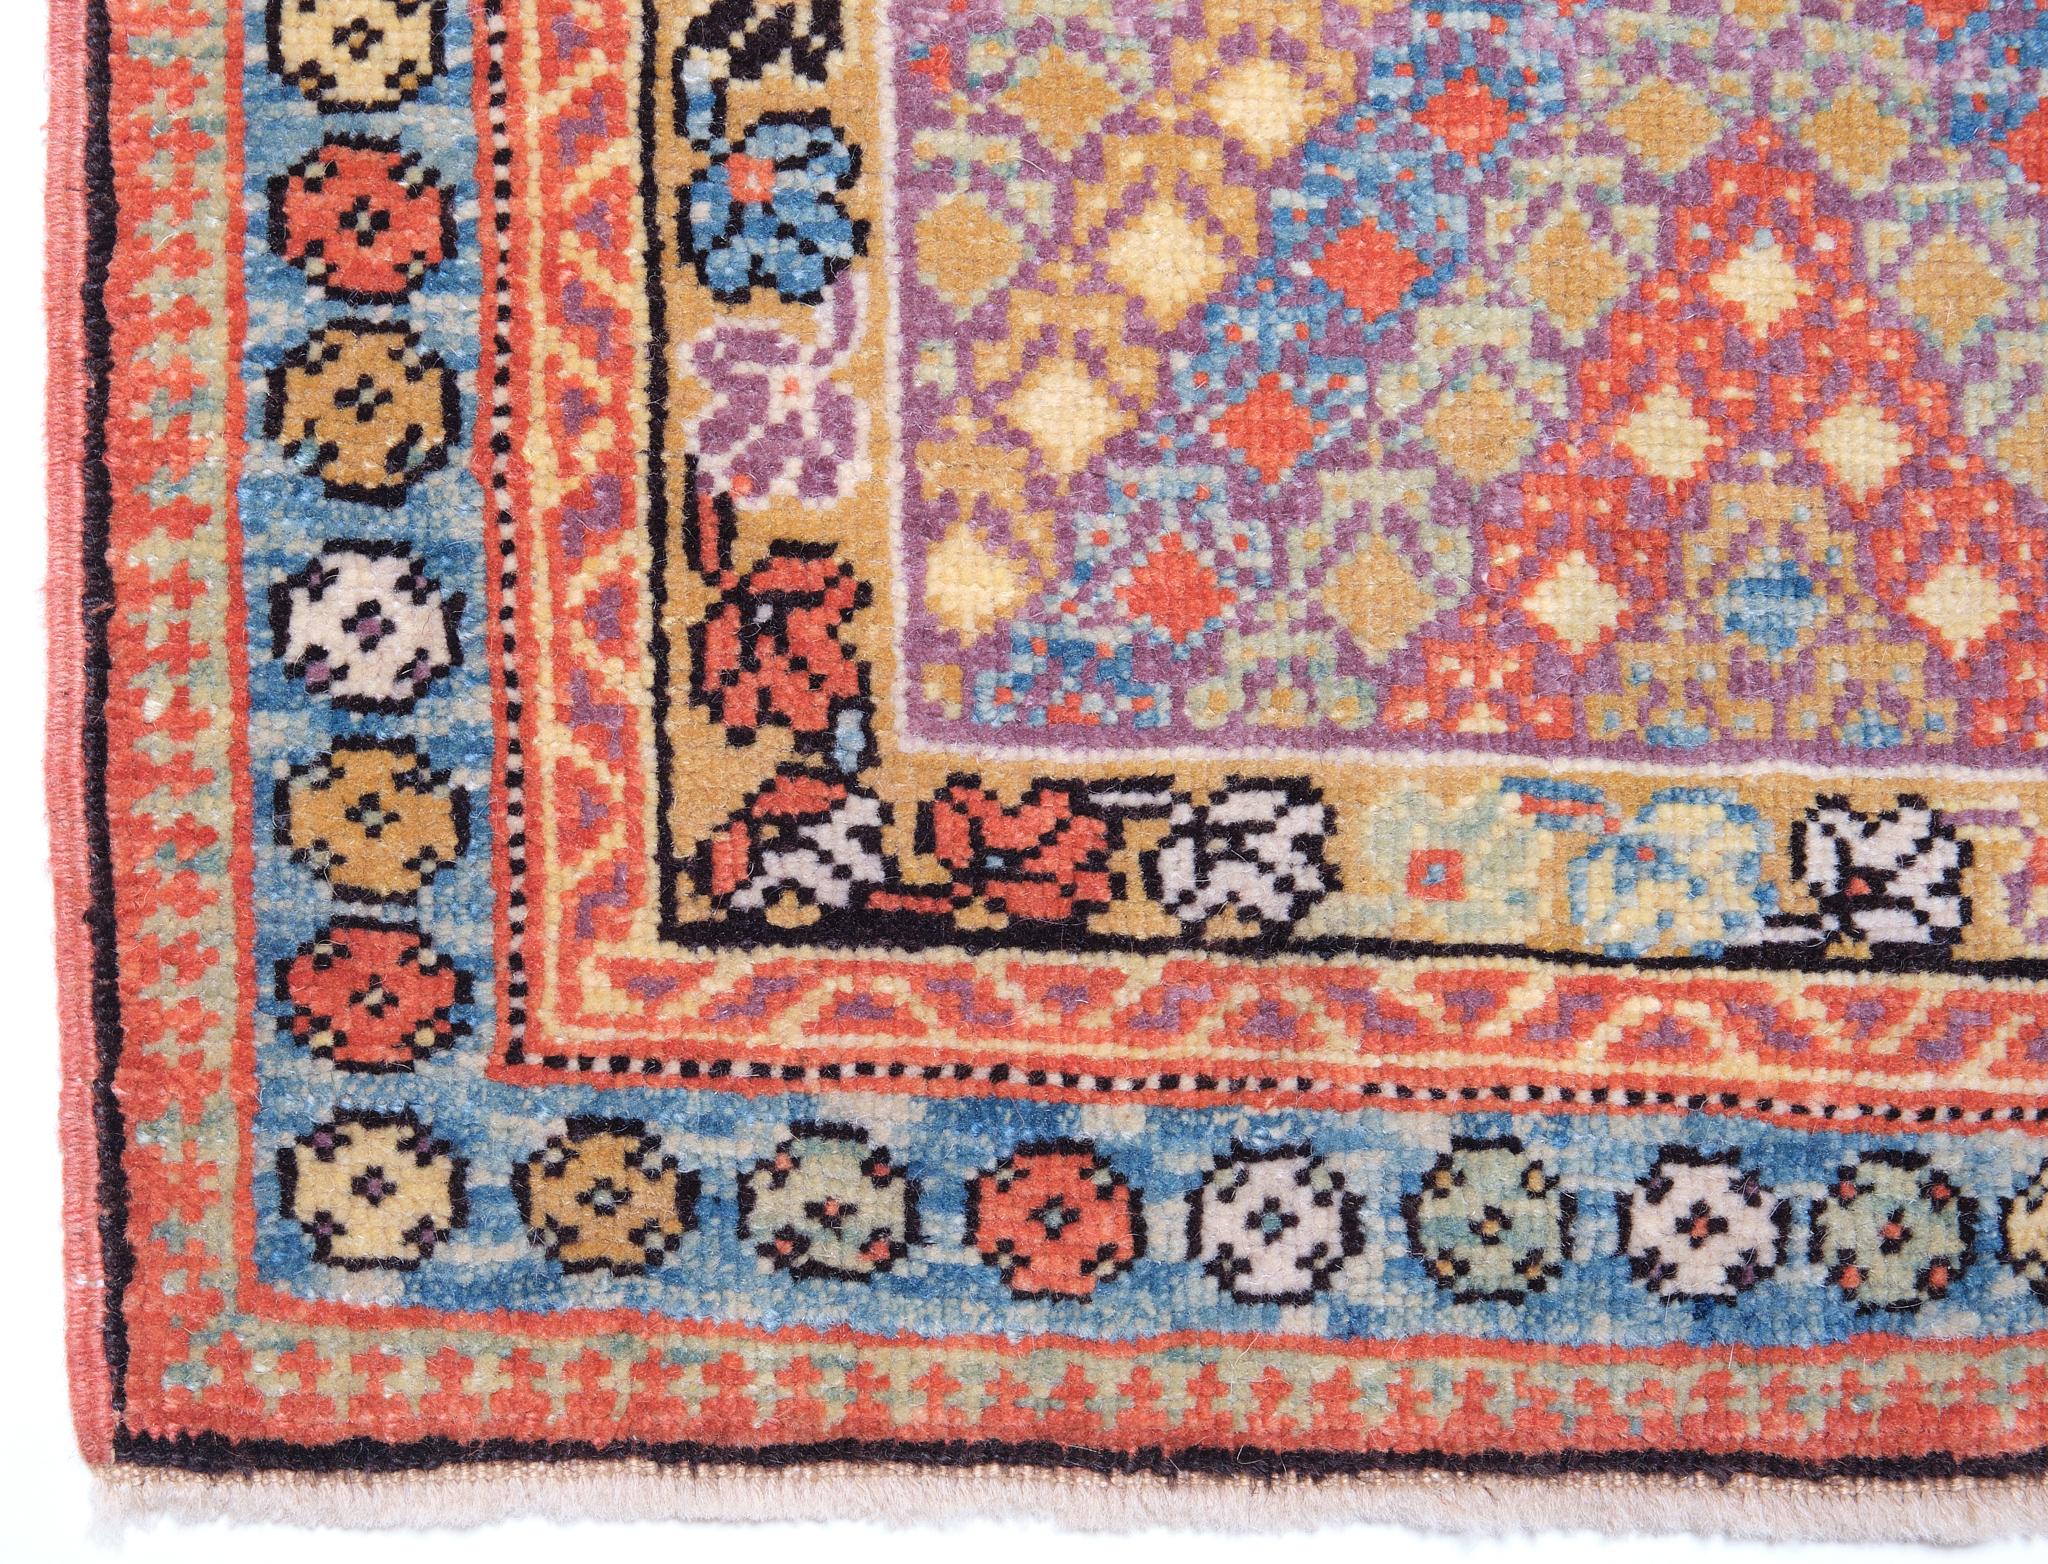 This small piece exhibits a forceful design on a small scale in a small area. These kinds of small Turkish yastiks or mats are found which contain an extraordinary amount of power within a very small space. There are diagonal ascending rows of